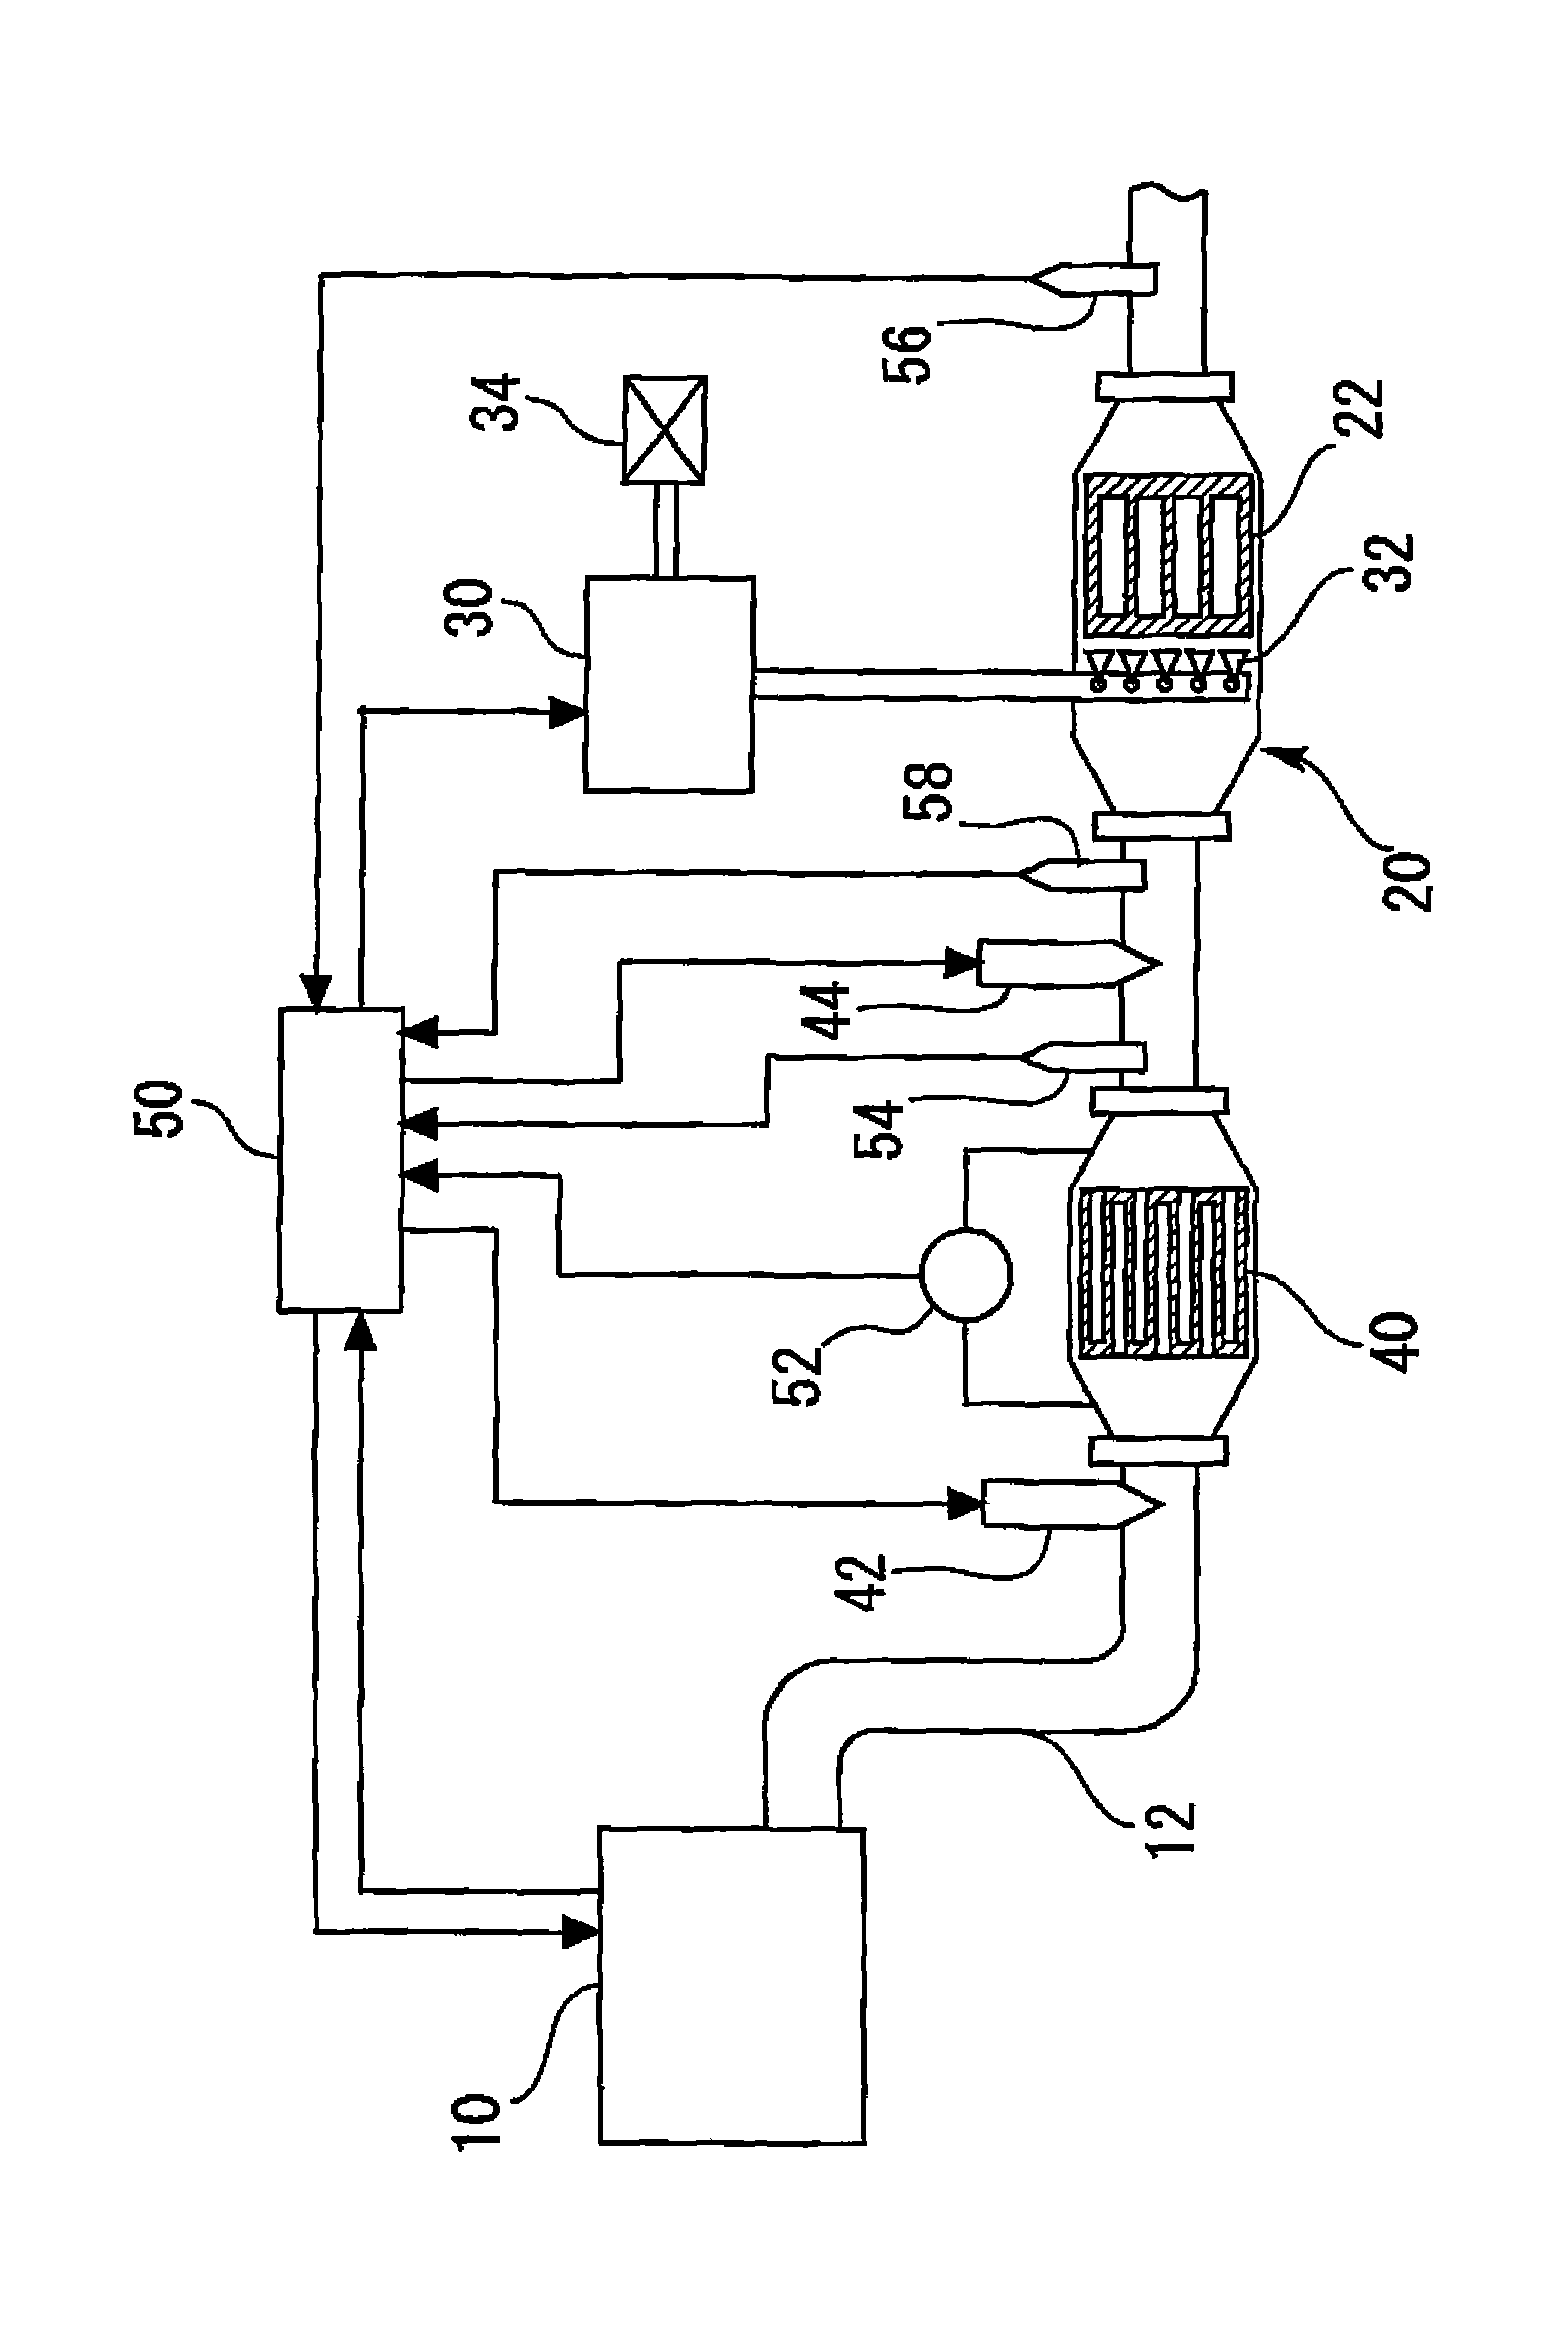 Apparatus for purifying exhaust gas of internal combustion engine